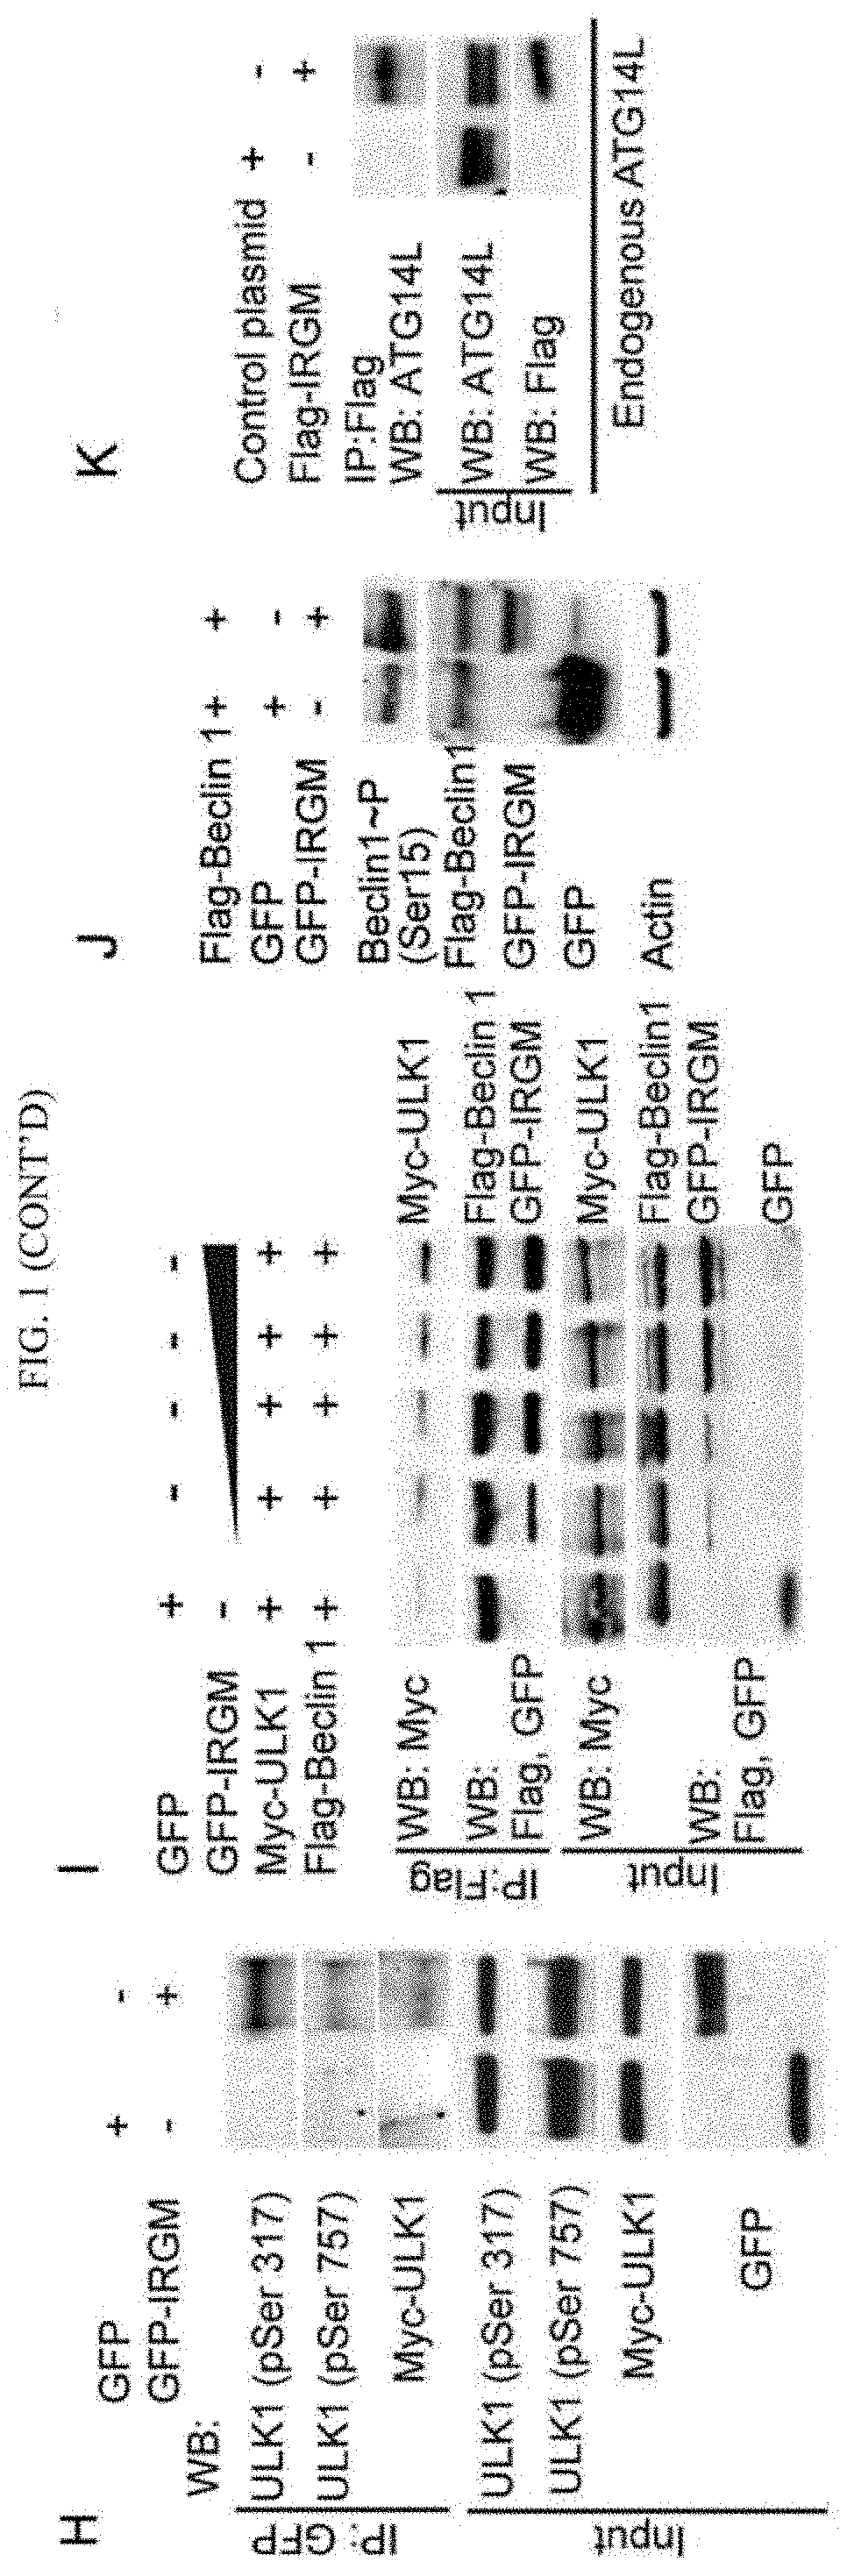 IRGM and precision autophagy controls for antimicrobial and inflammatory disease states and methods of detection of autophagy